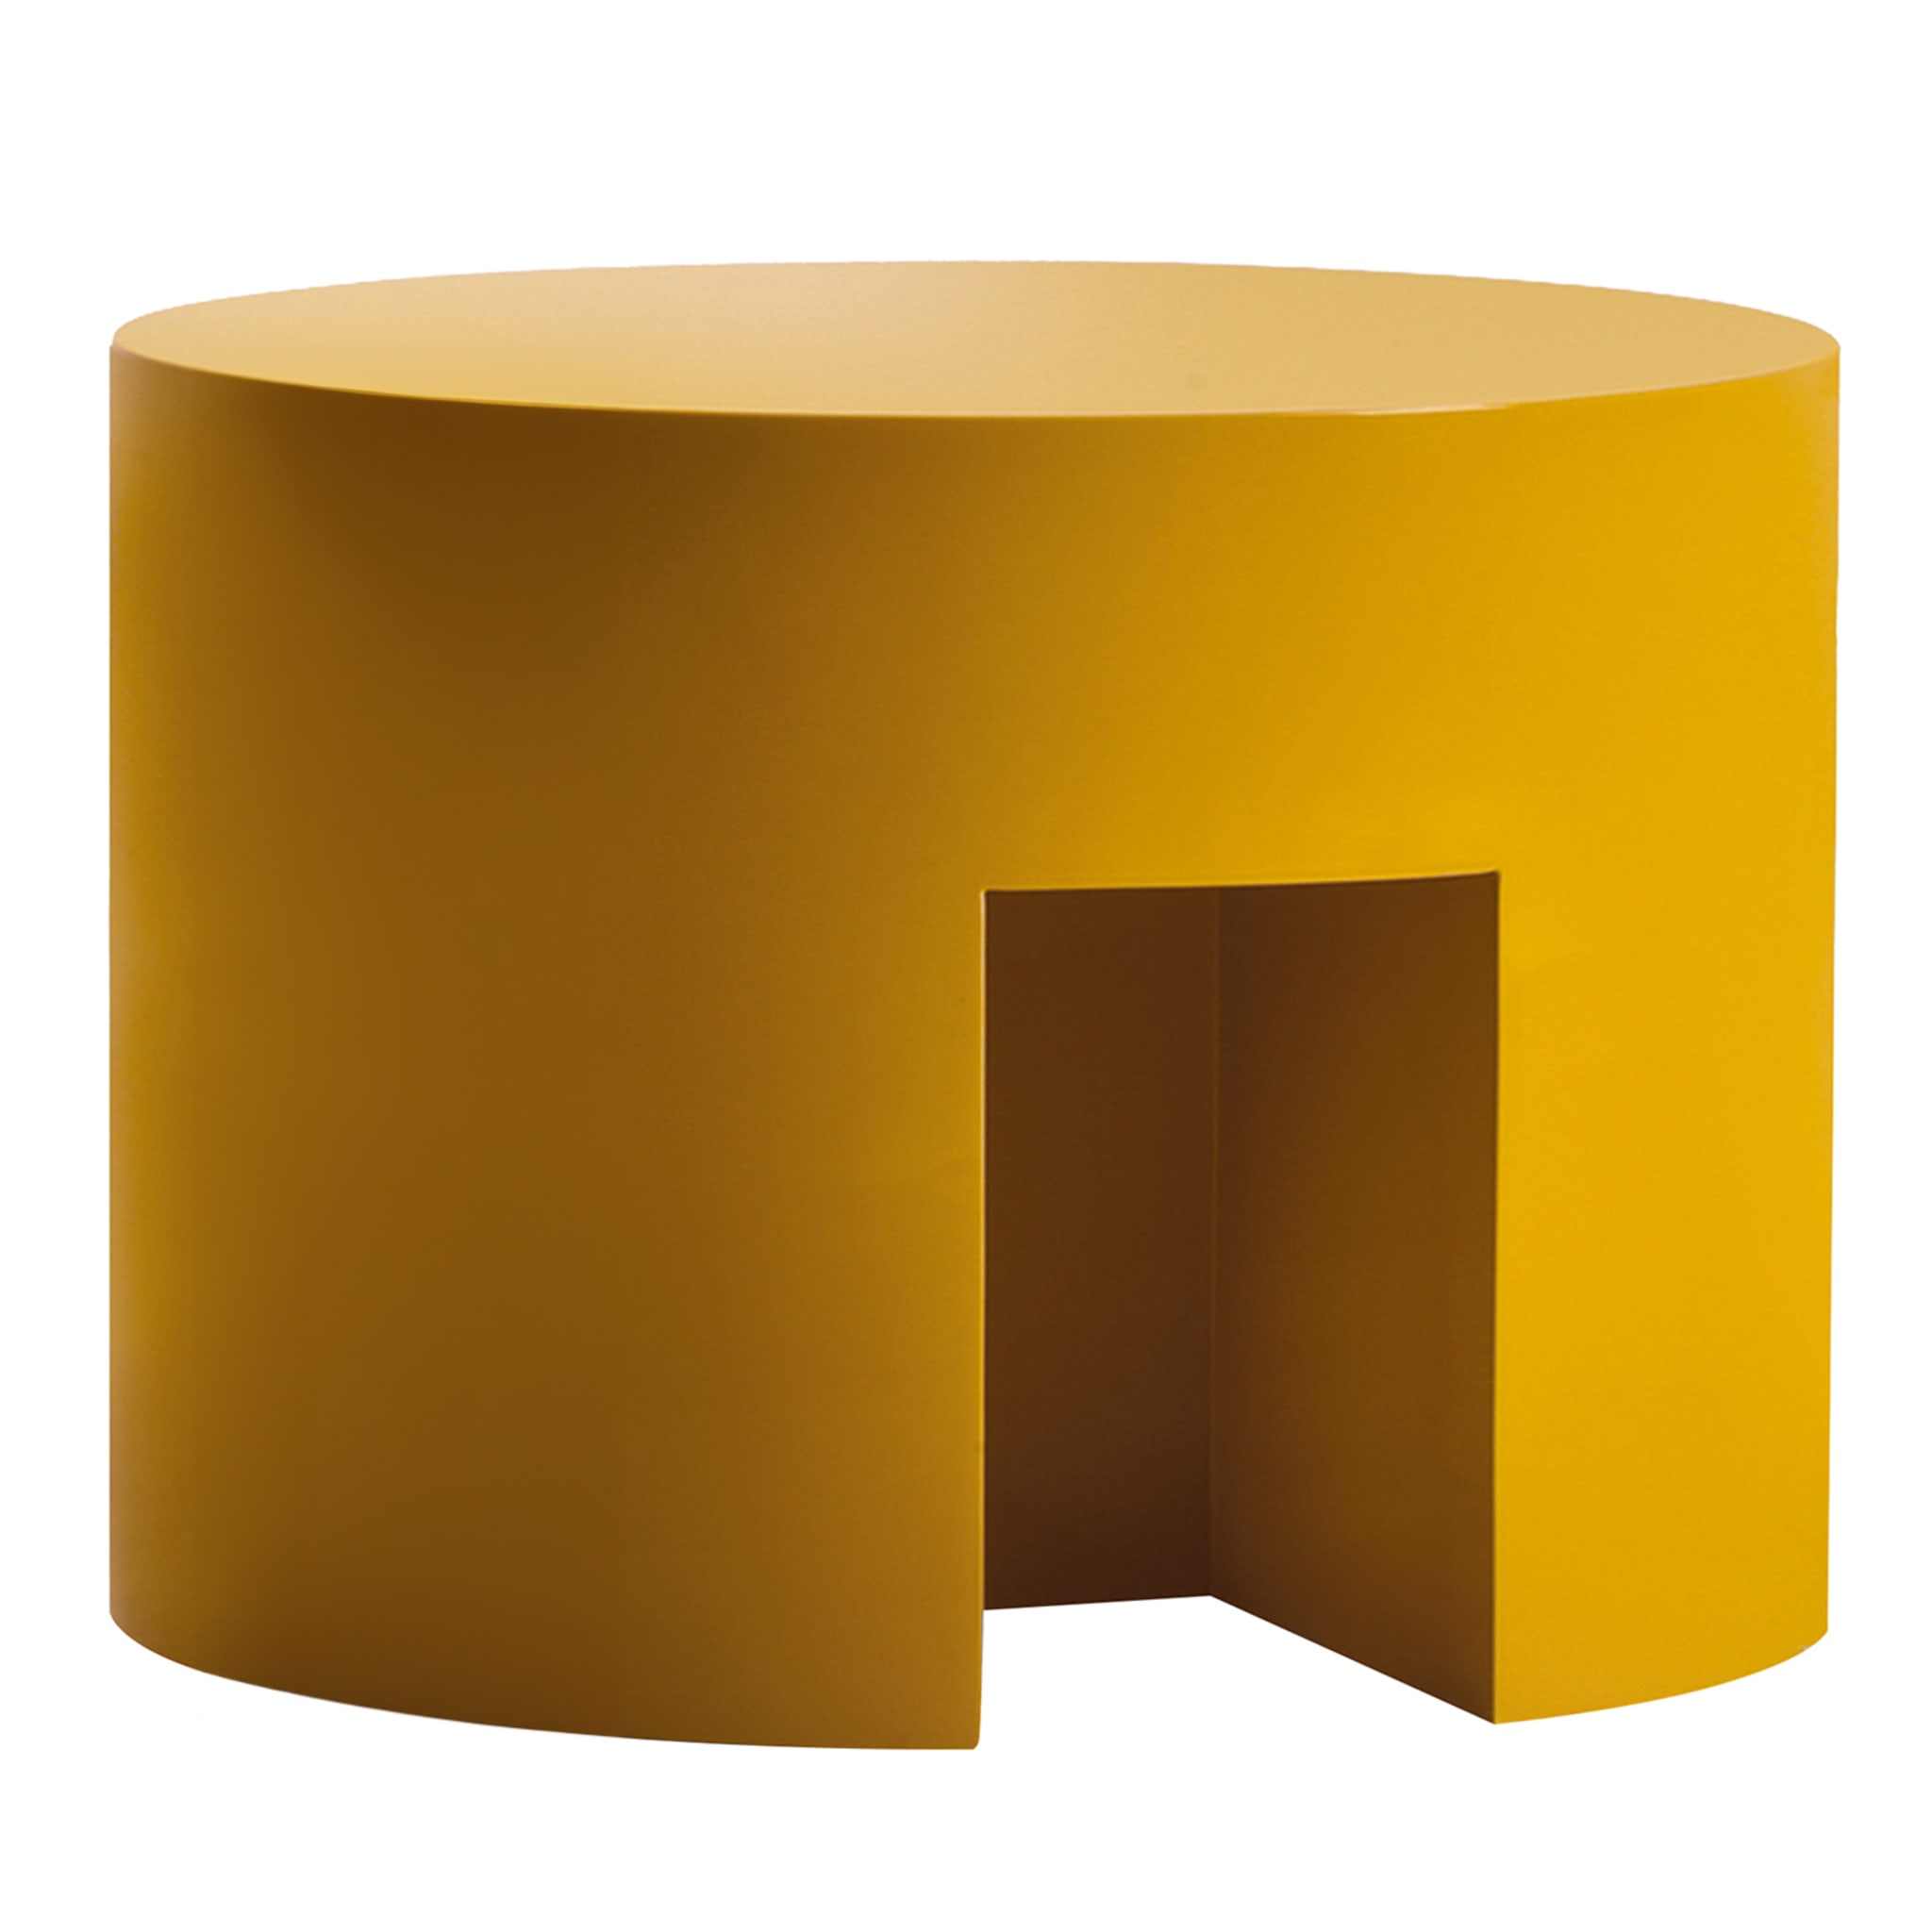 Maryland Yellow Low Table by Dainelli Studio - Main view